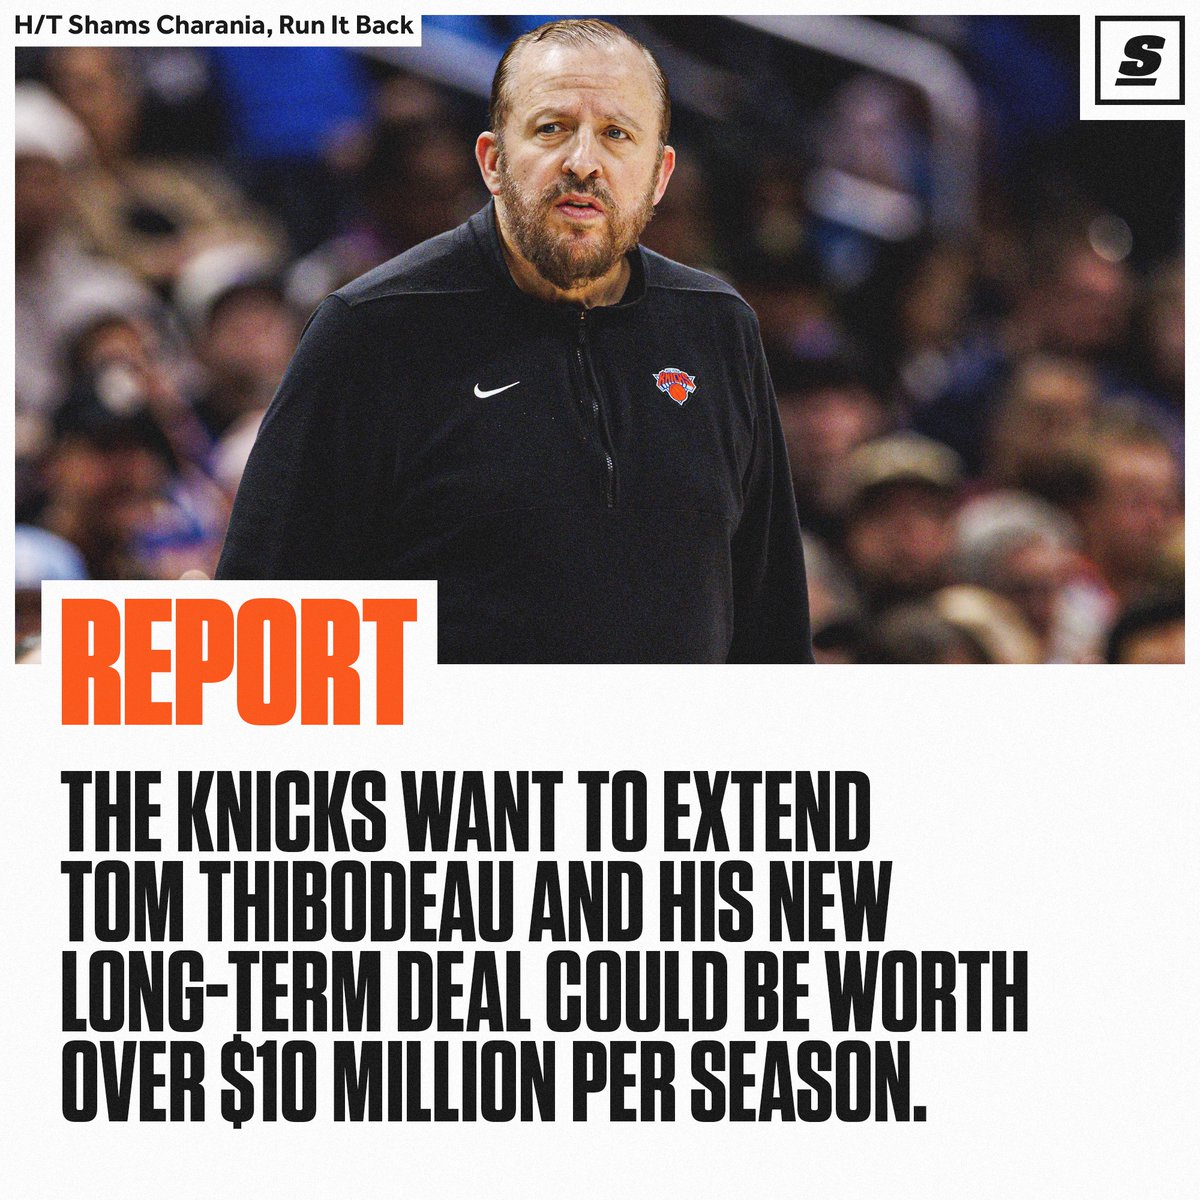 The Knicks are prepared to give Coach Thibs the BAG. 💰